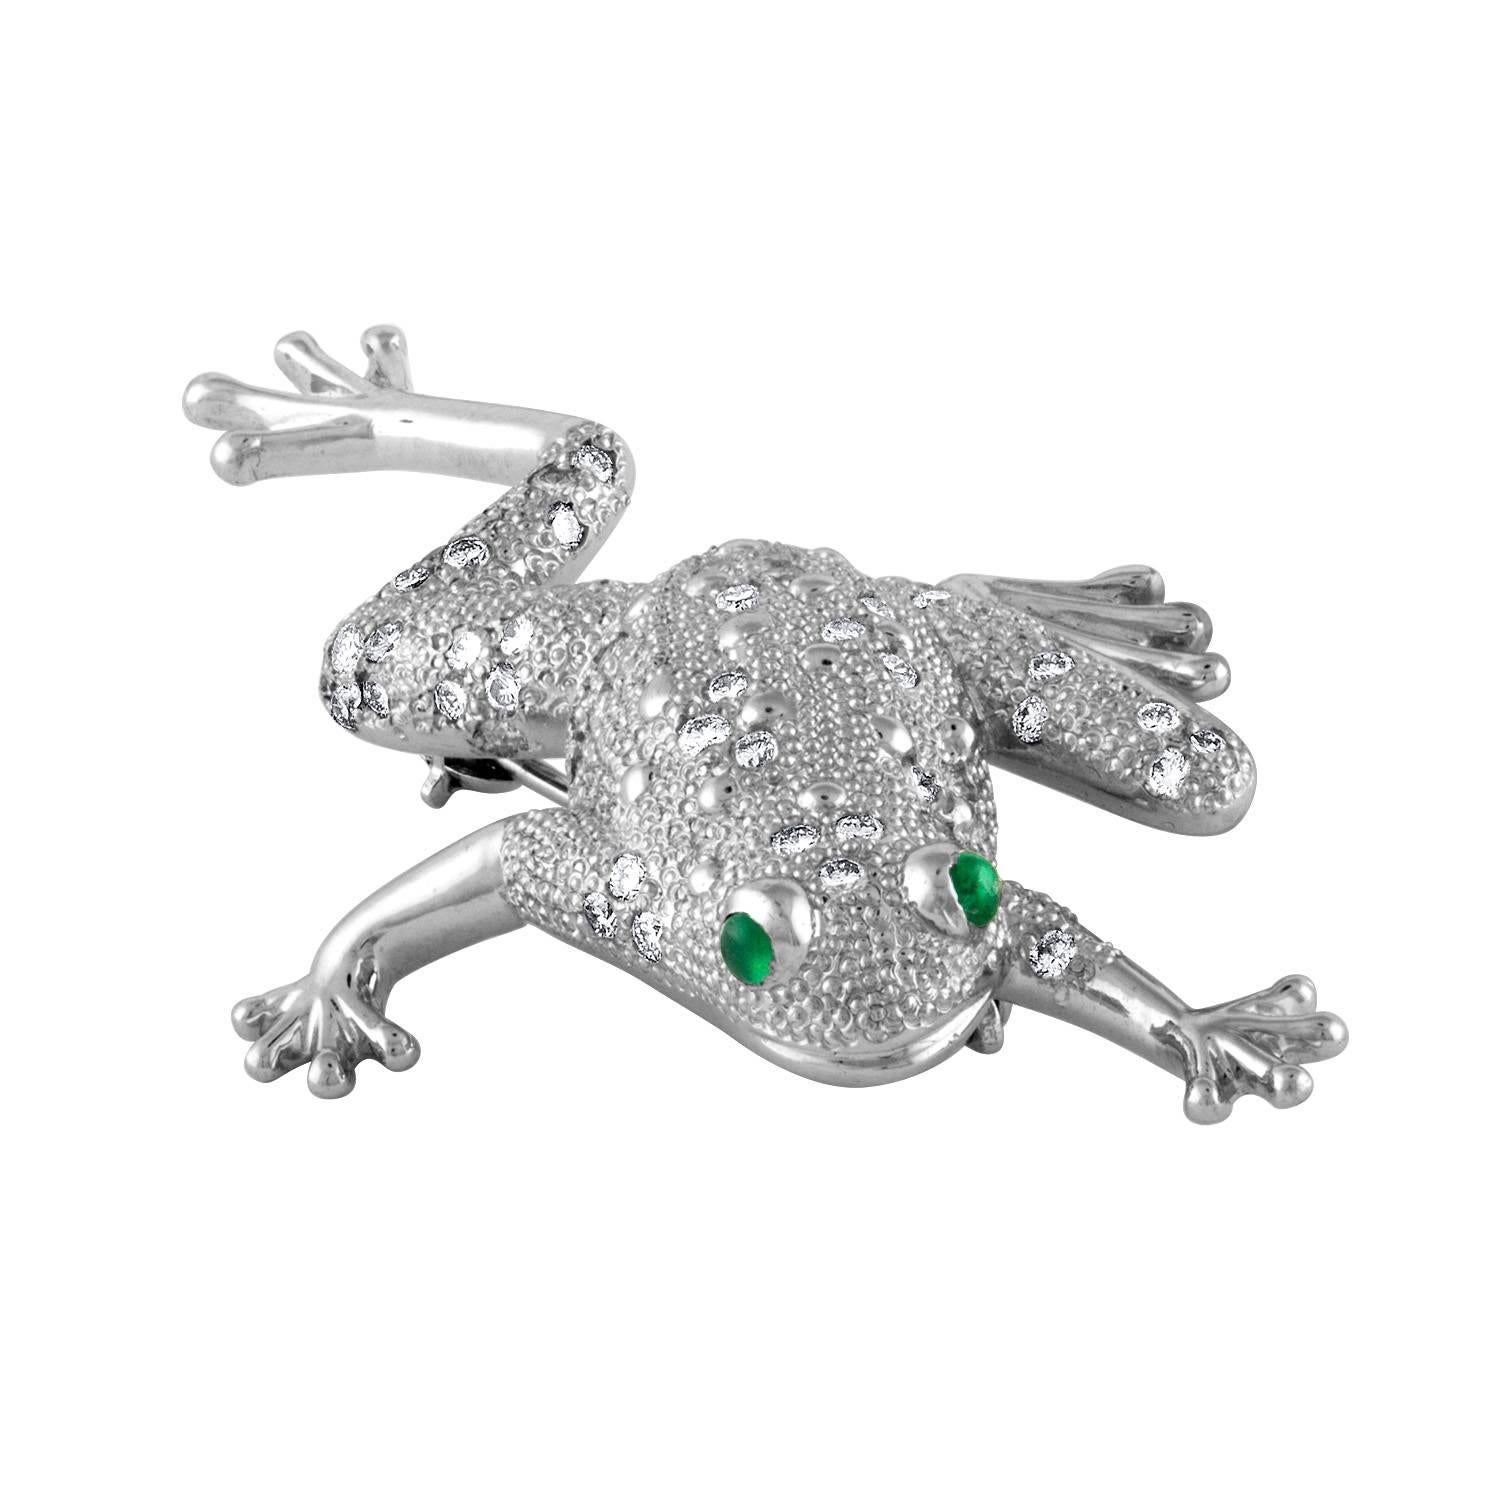 This brooch is designed by Design by Vatche.
Made out of .950 platinum. 
diamonds: 1cttw.
emerald: .35cttw
weight: 10.7 dwt 